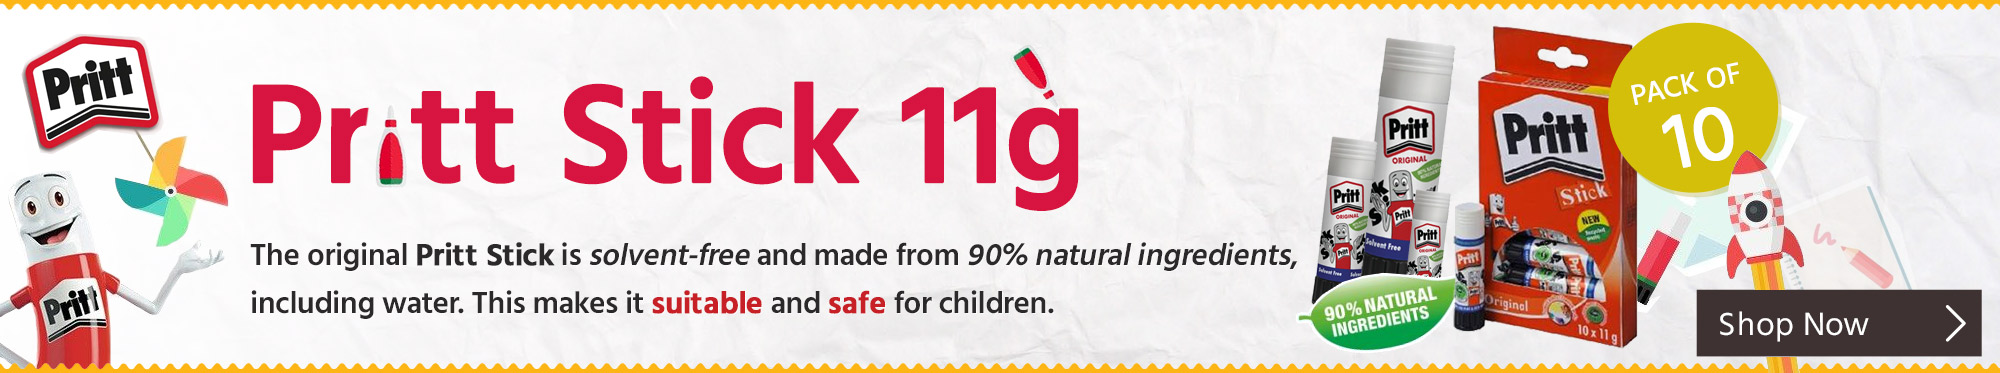 Pritt Stick - A Suitable and Safe Choice For Children